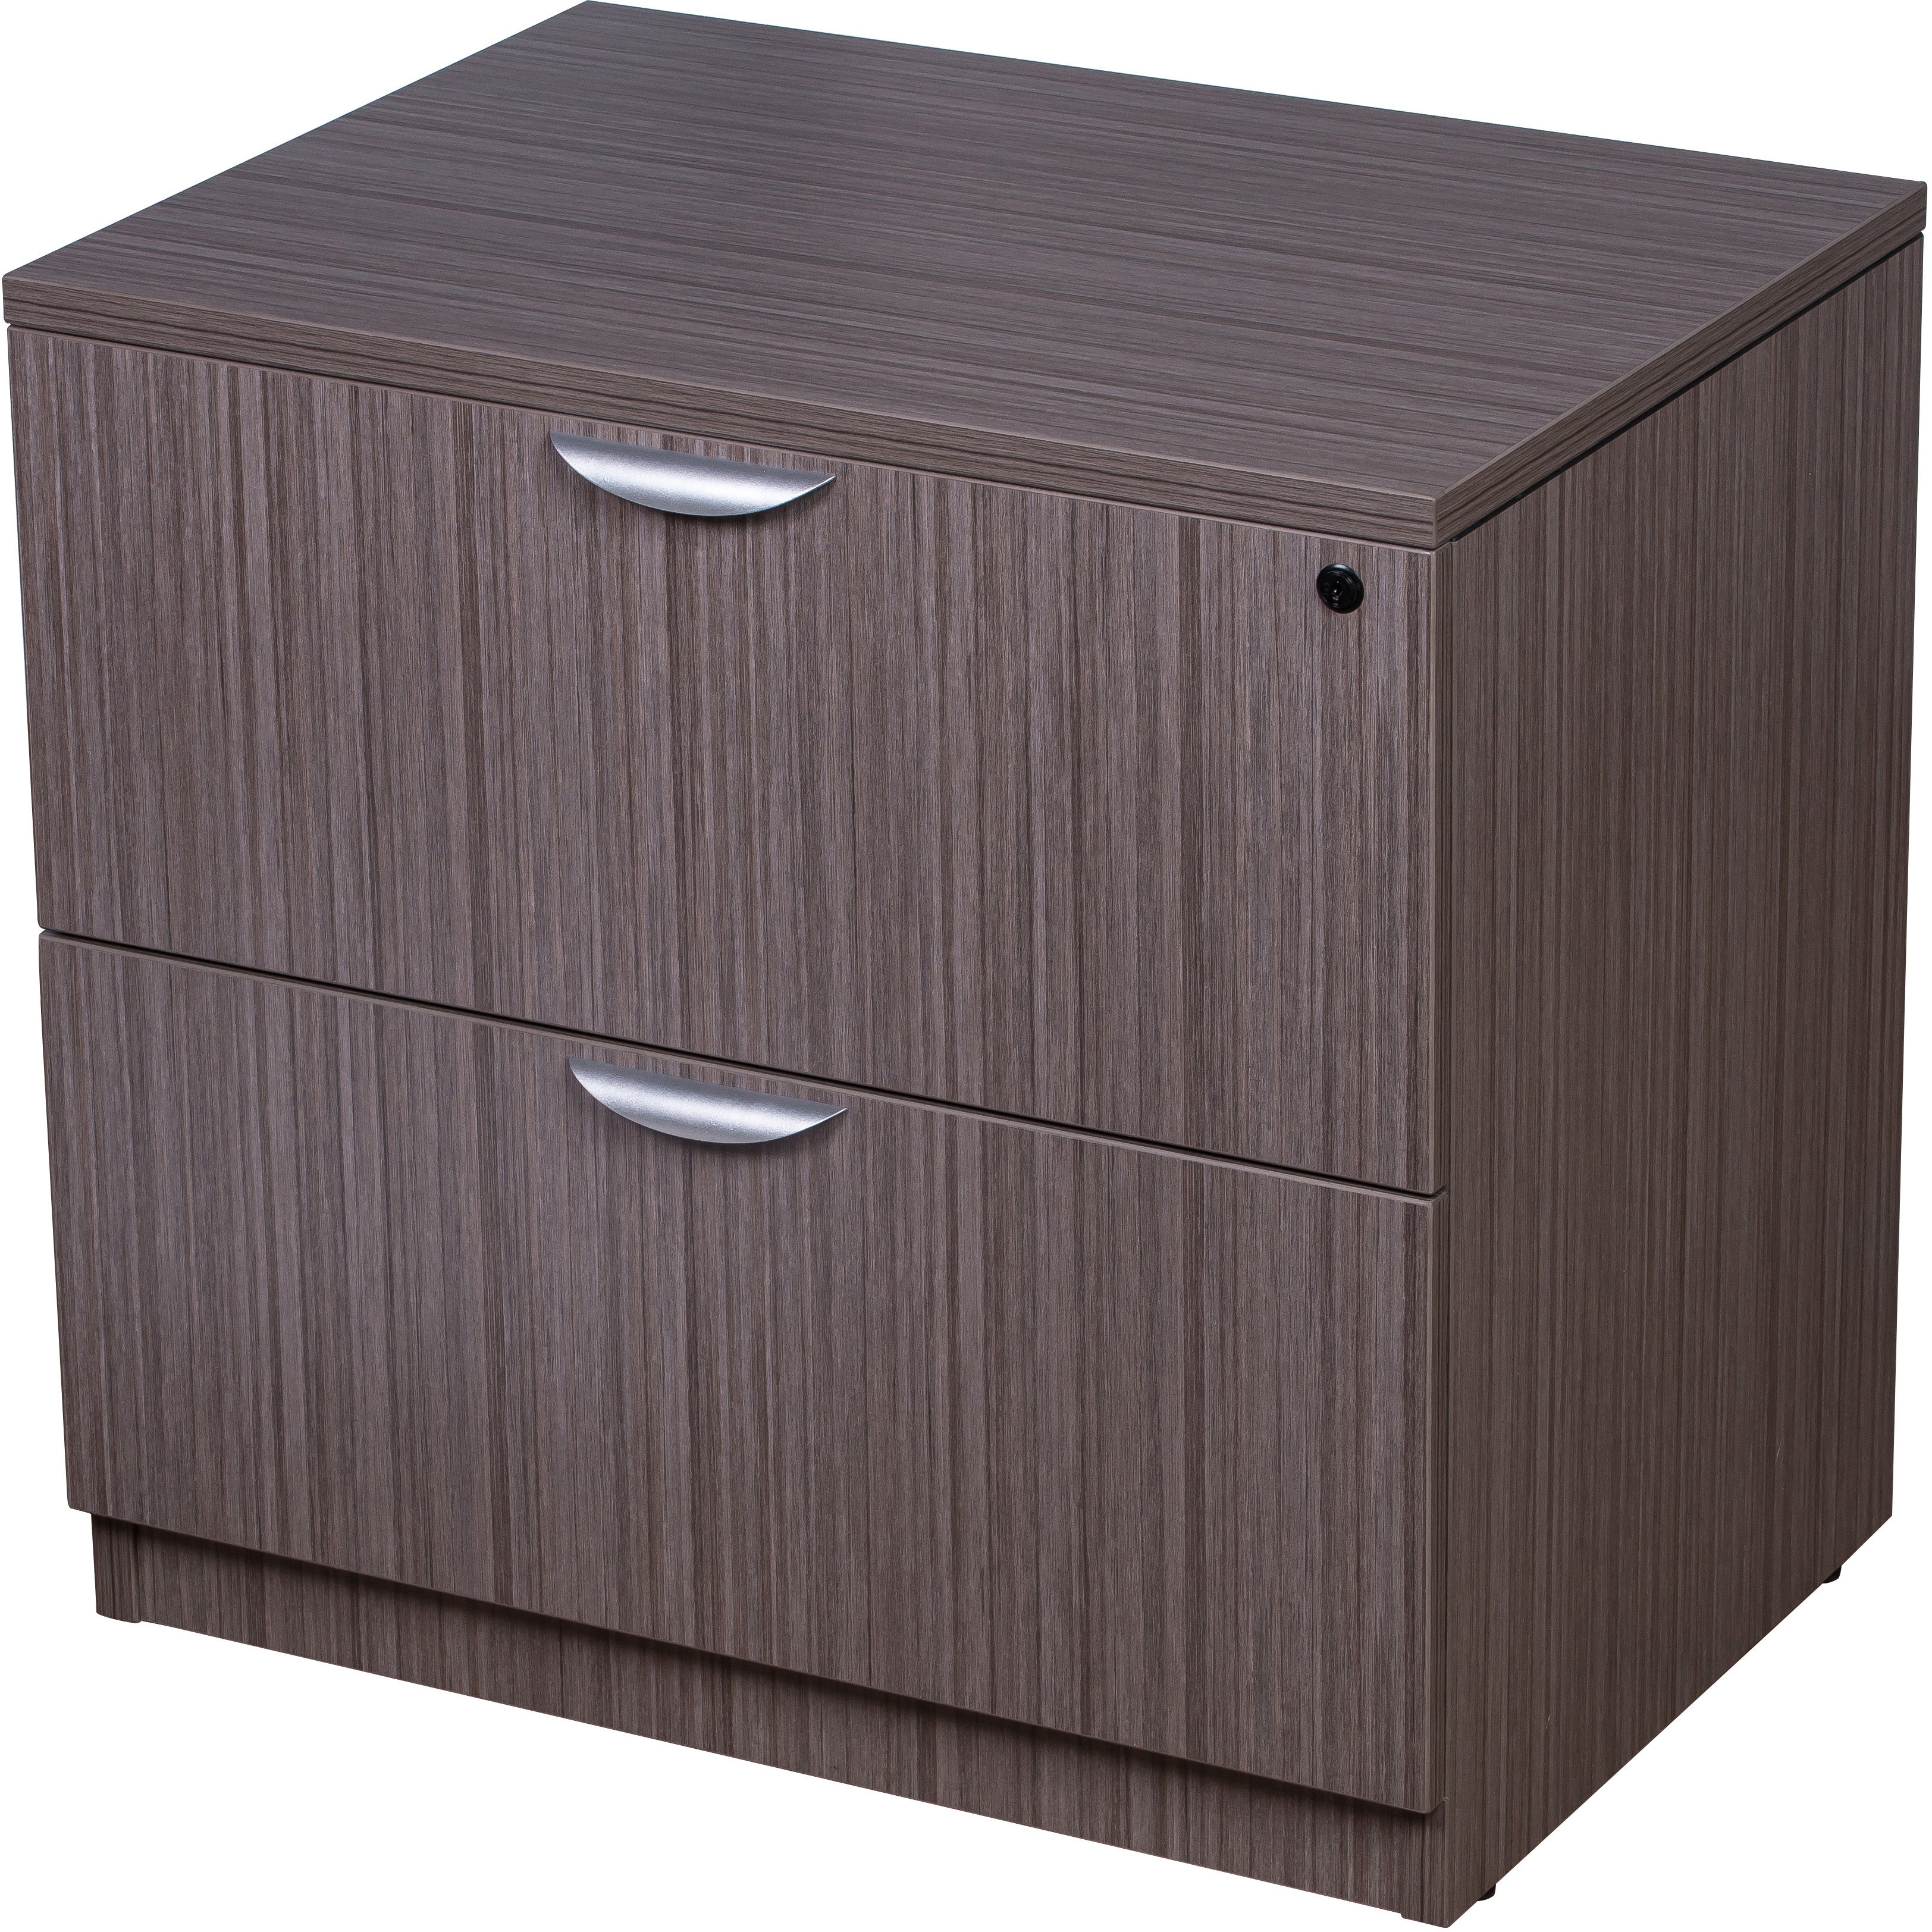 2-Drawer Lateral File, Driftwood, N112-DW